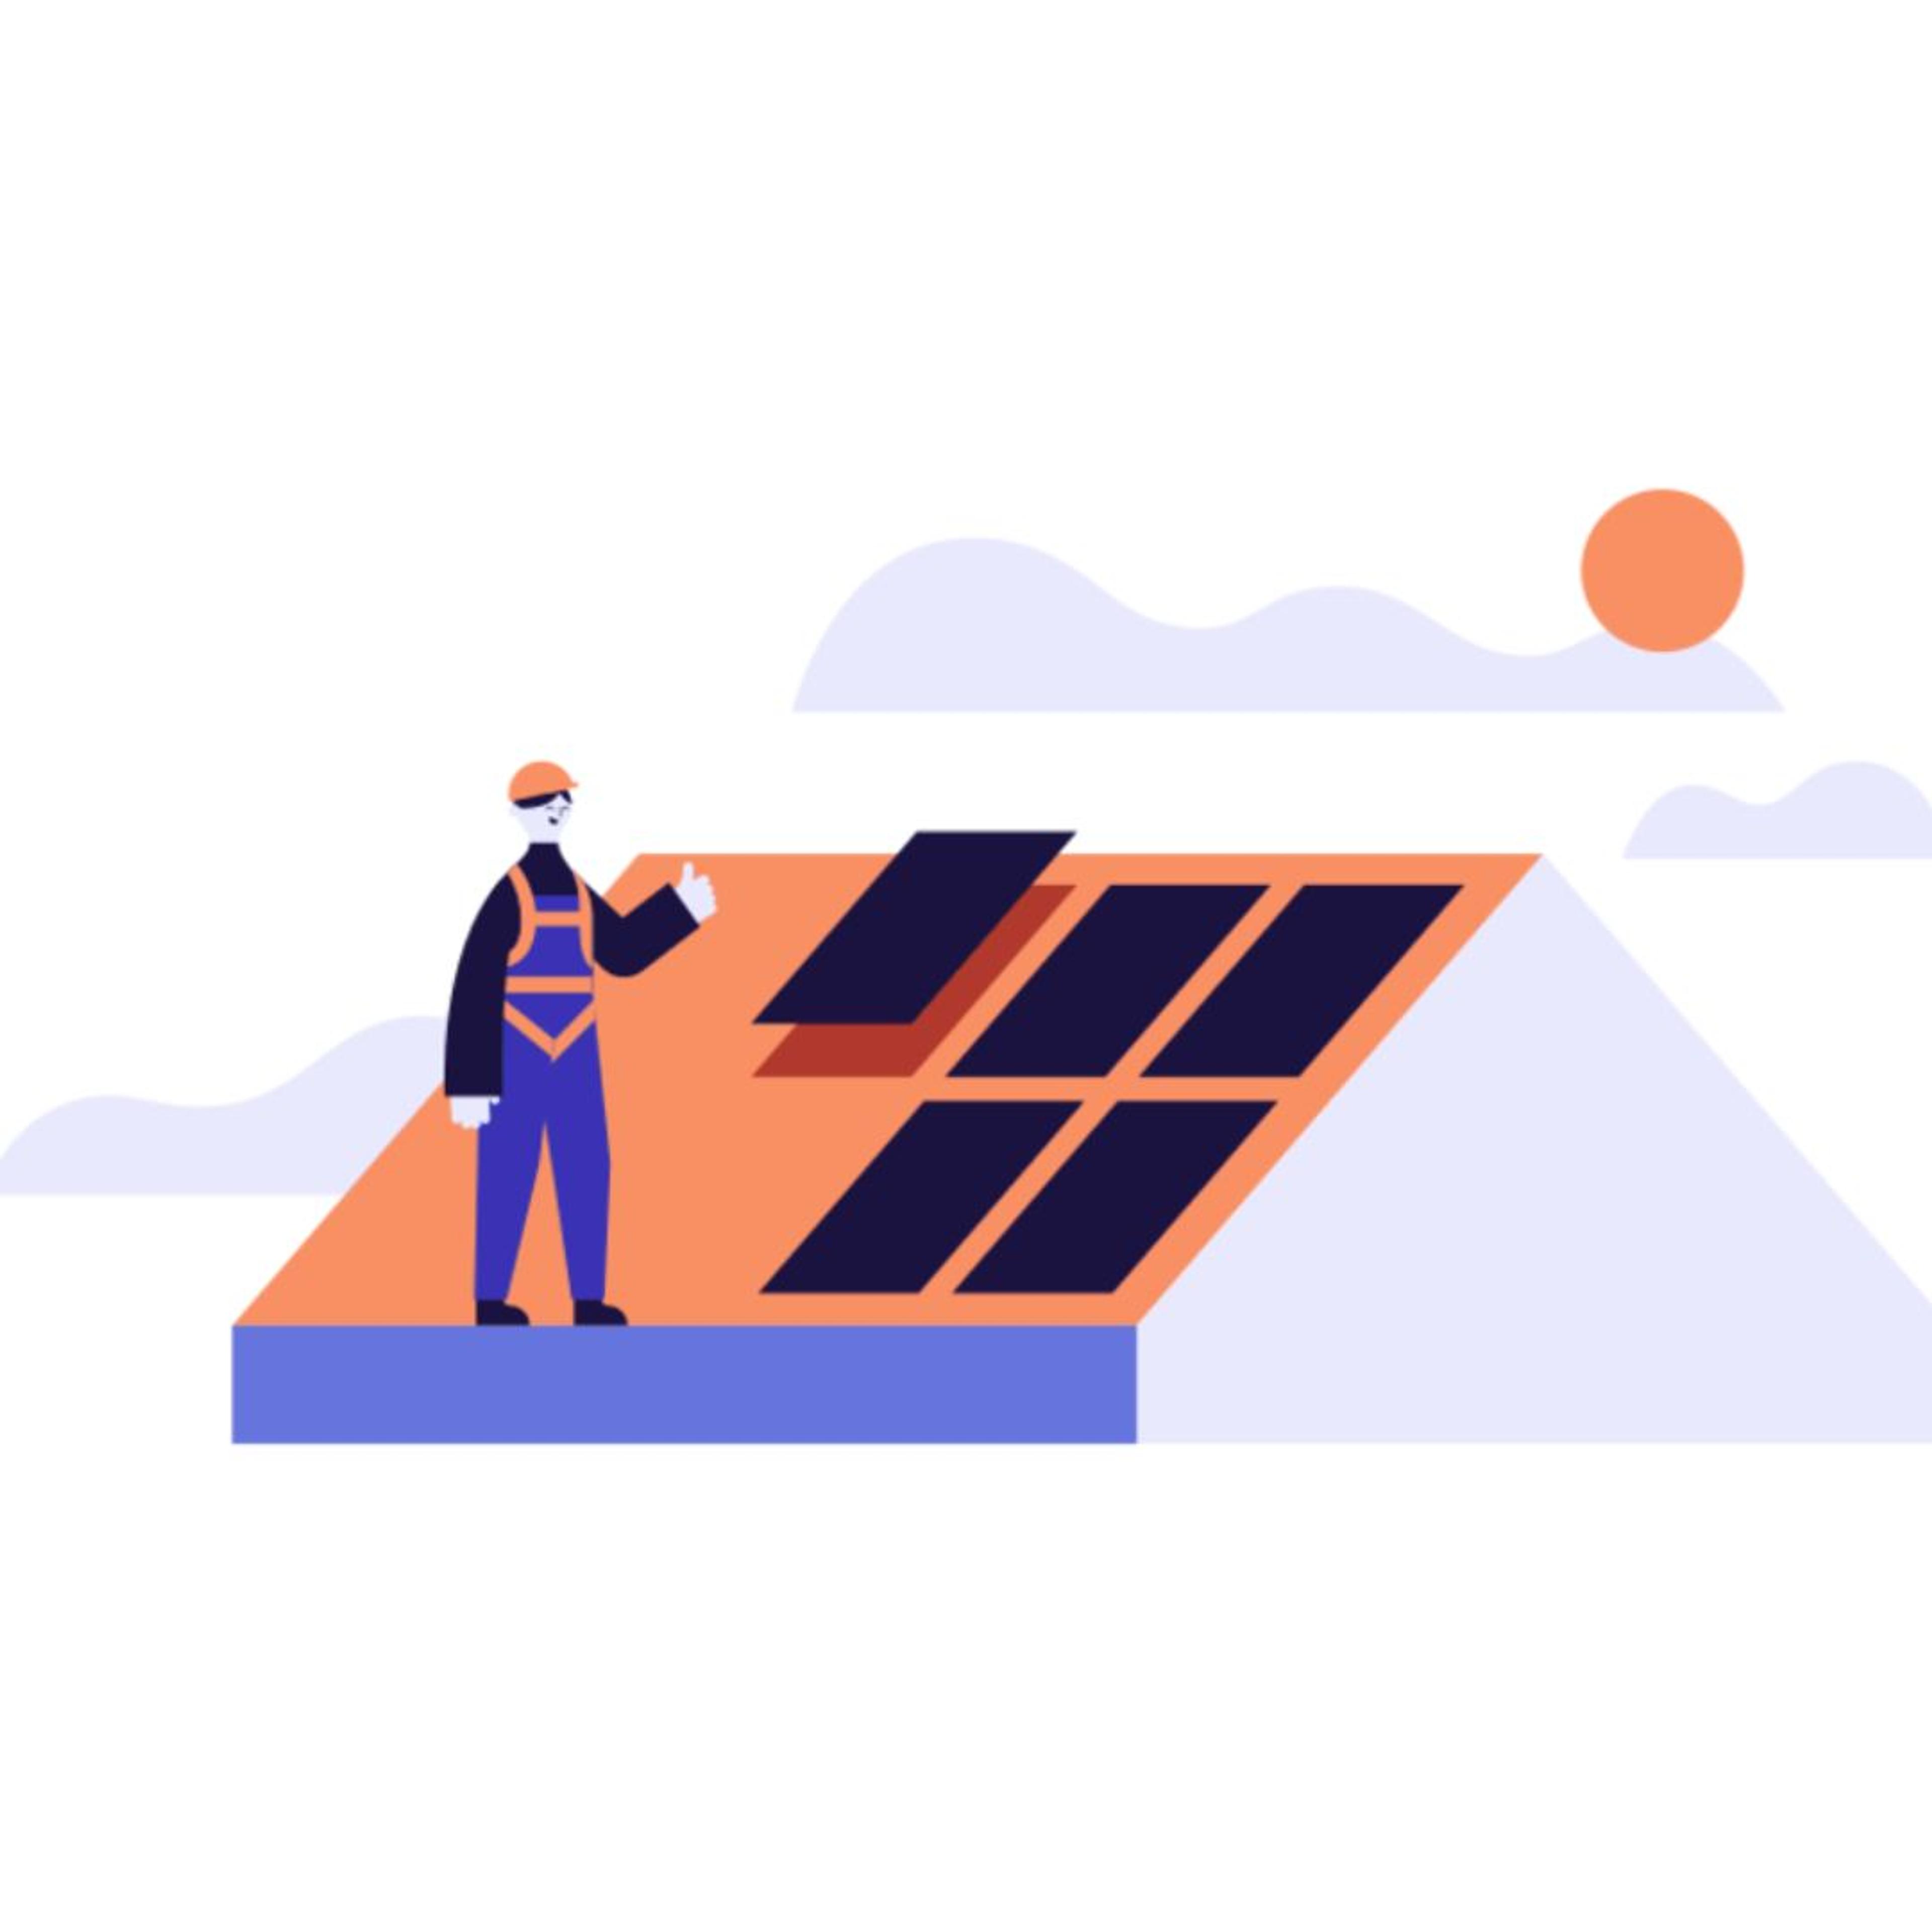 Illustration with solar panels on rooftop